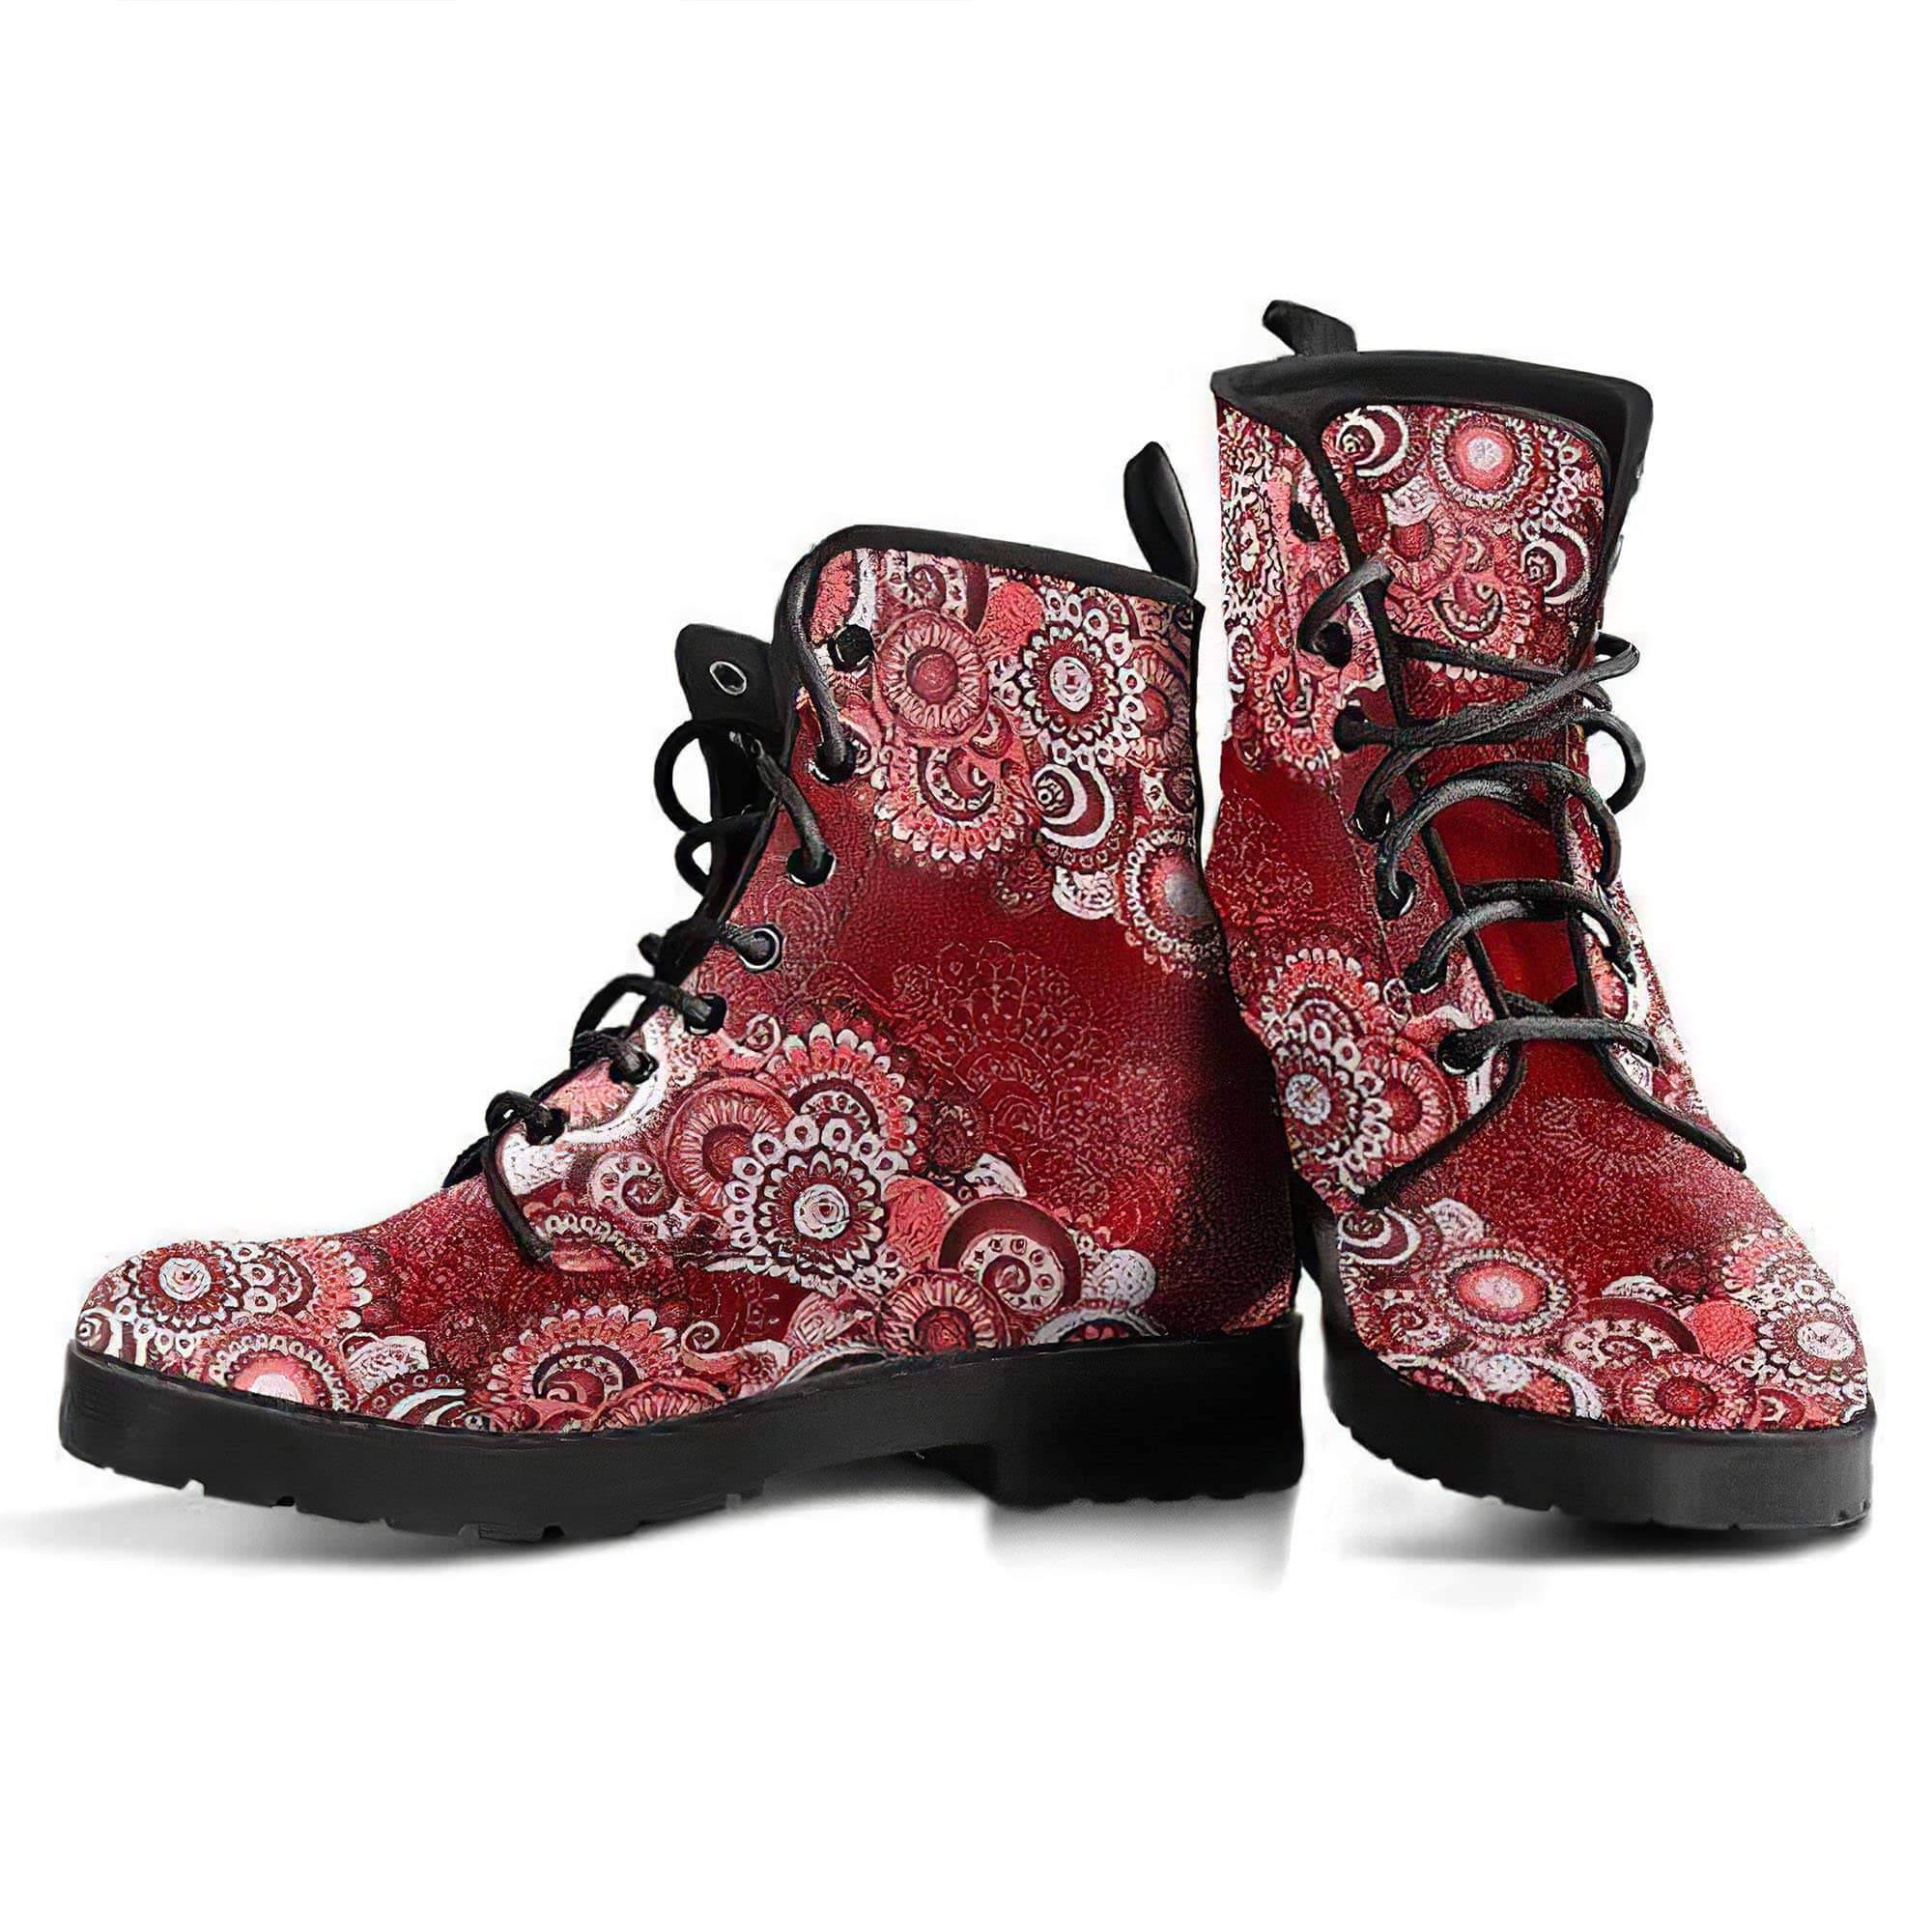 red-mandalas-handcrafted-boots-women-s-leather-boots-12051943850045.jpg